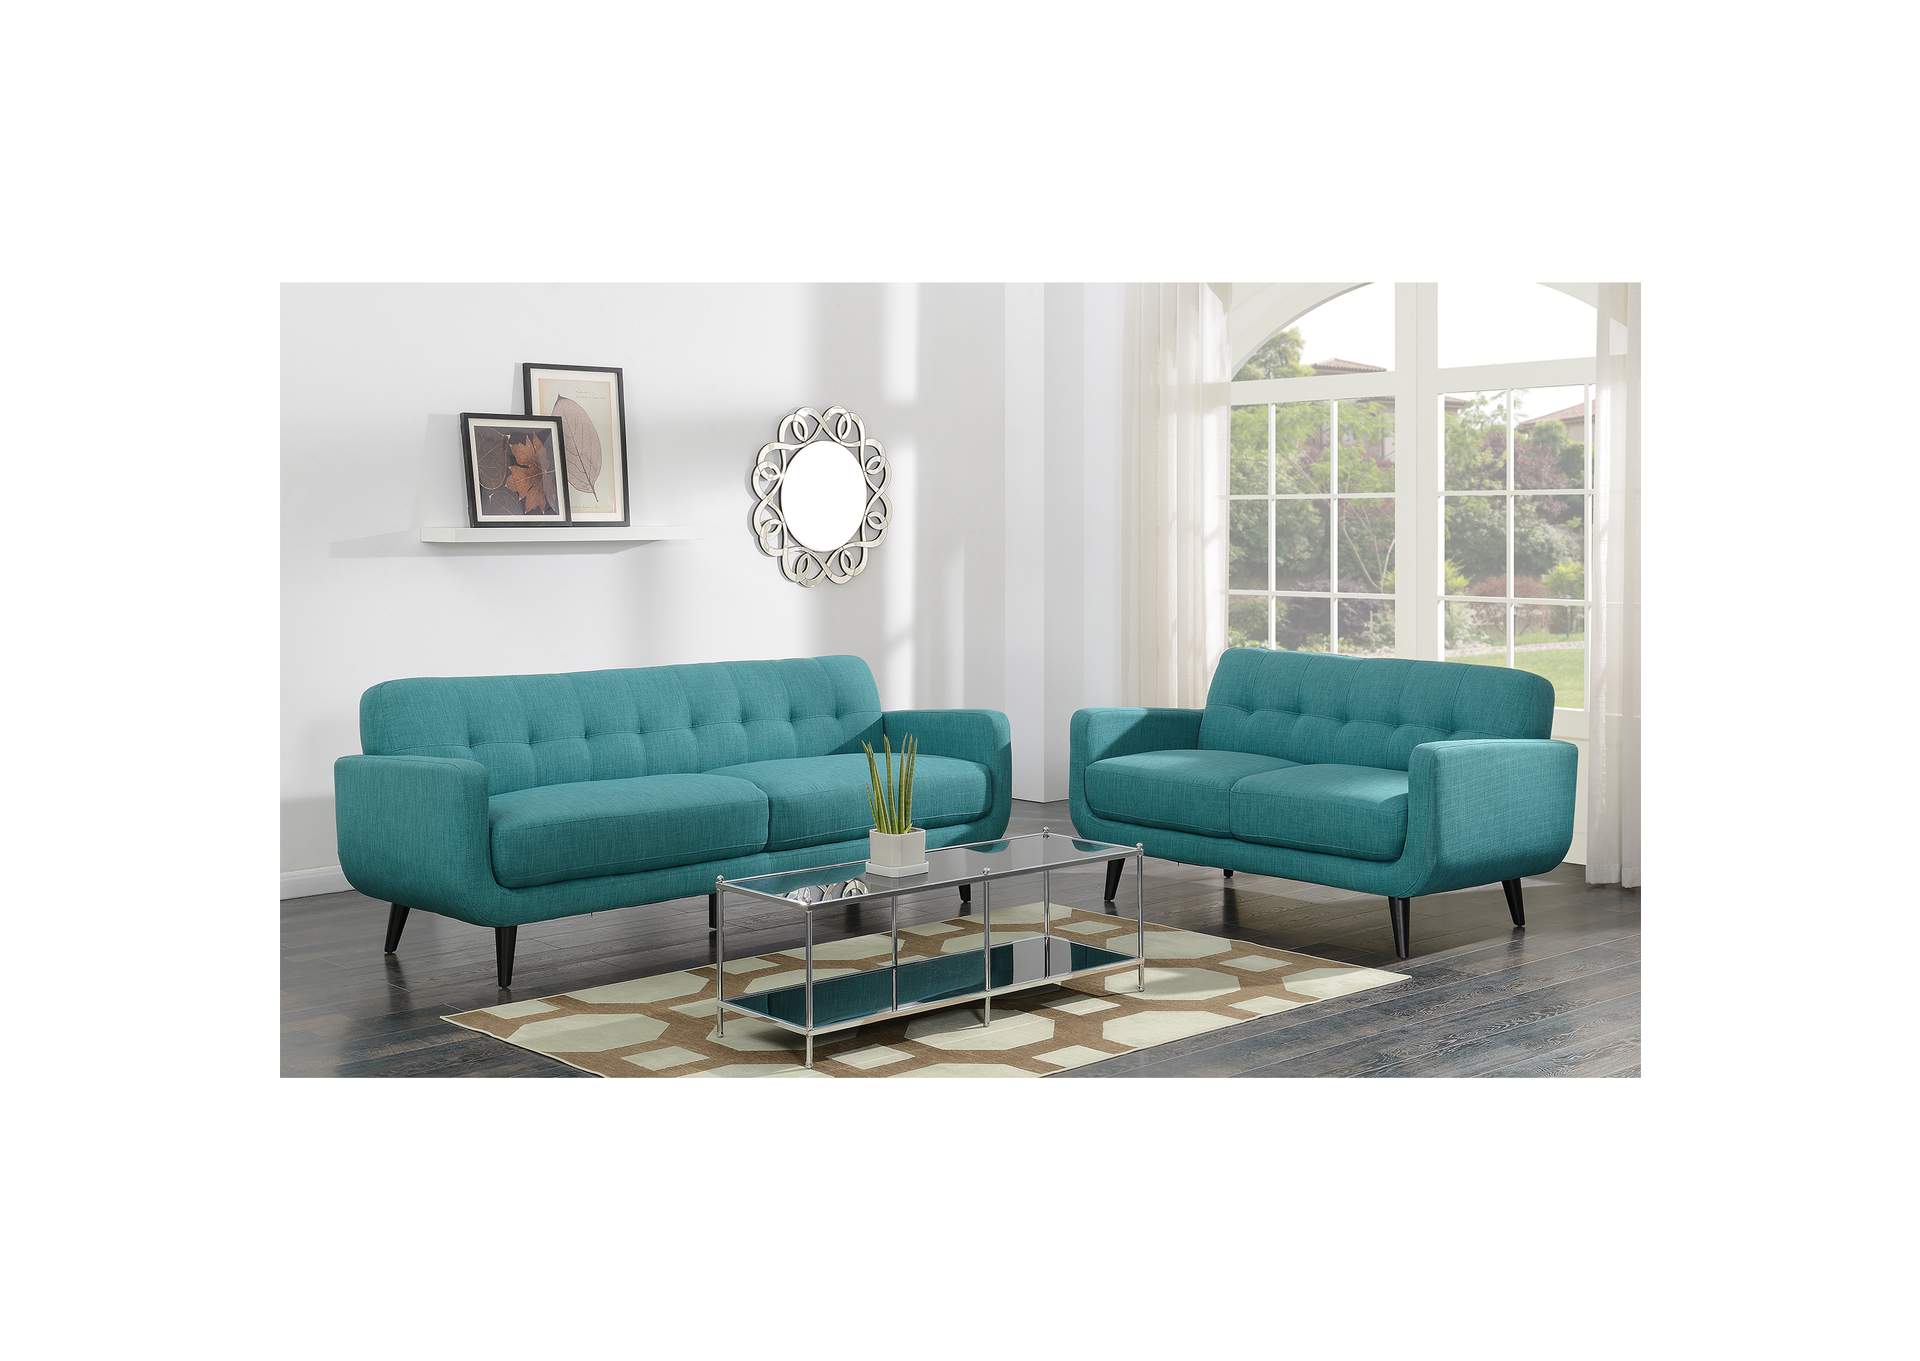 Hadley 4480 Love Seat Heirloom Teal With No Pillow,Elements